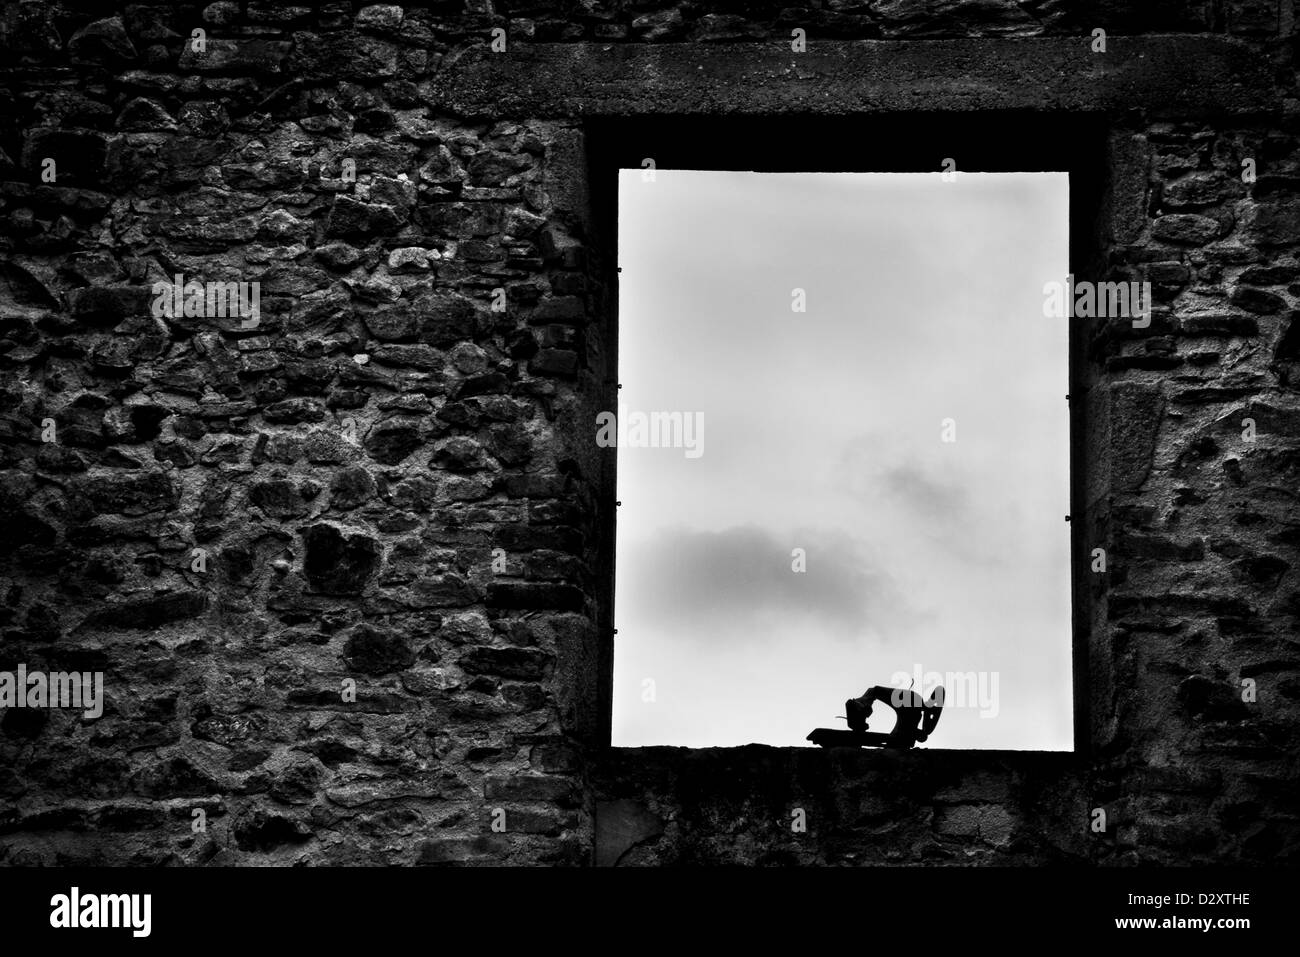 A fire damaged sewing machine silhouette in a window frame in a destroyed house. Stock Photo